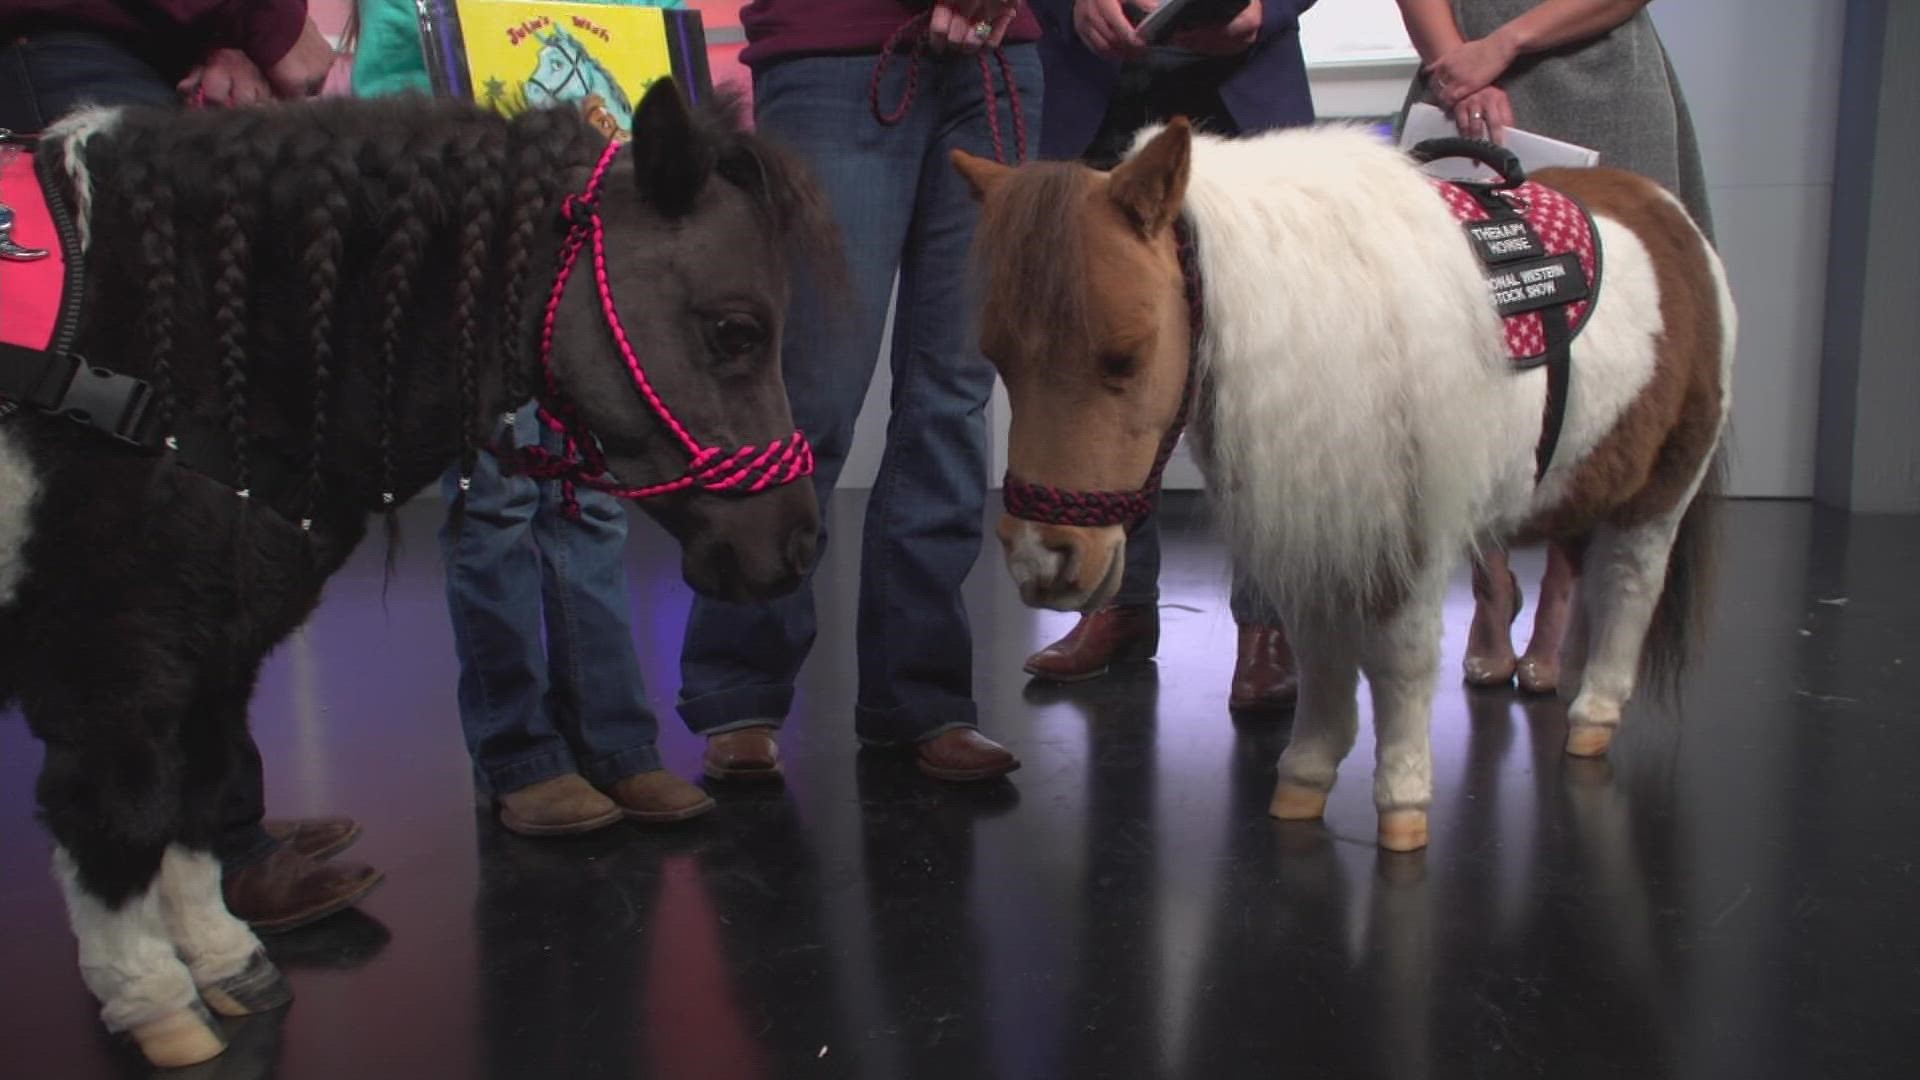 Miniature therapy horses Love Bug and Happy Times will help kick off the  117th annual National Western Stock Show on Thursday with a parade in downtown Denver.